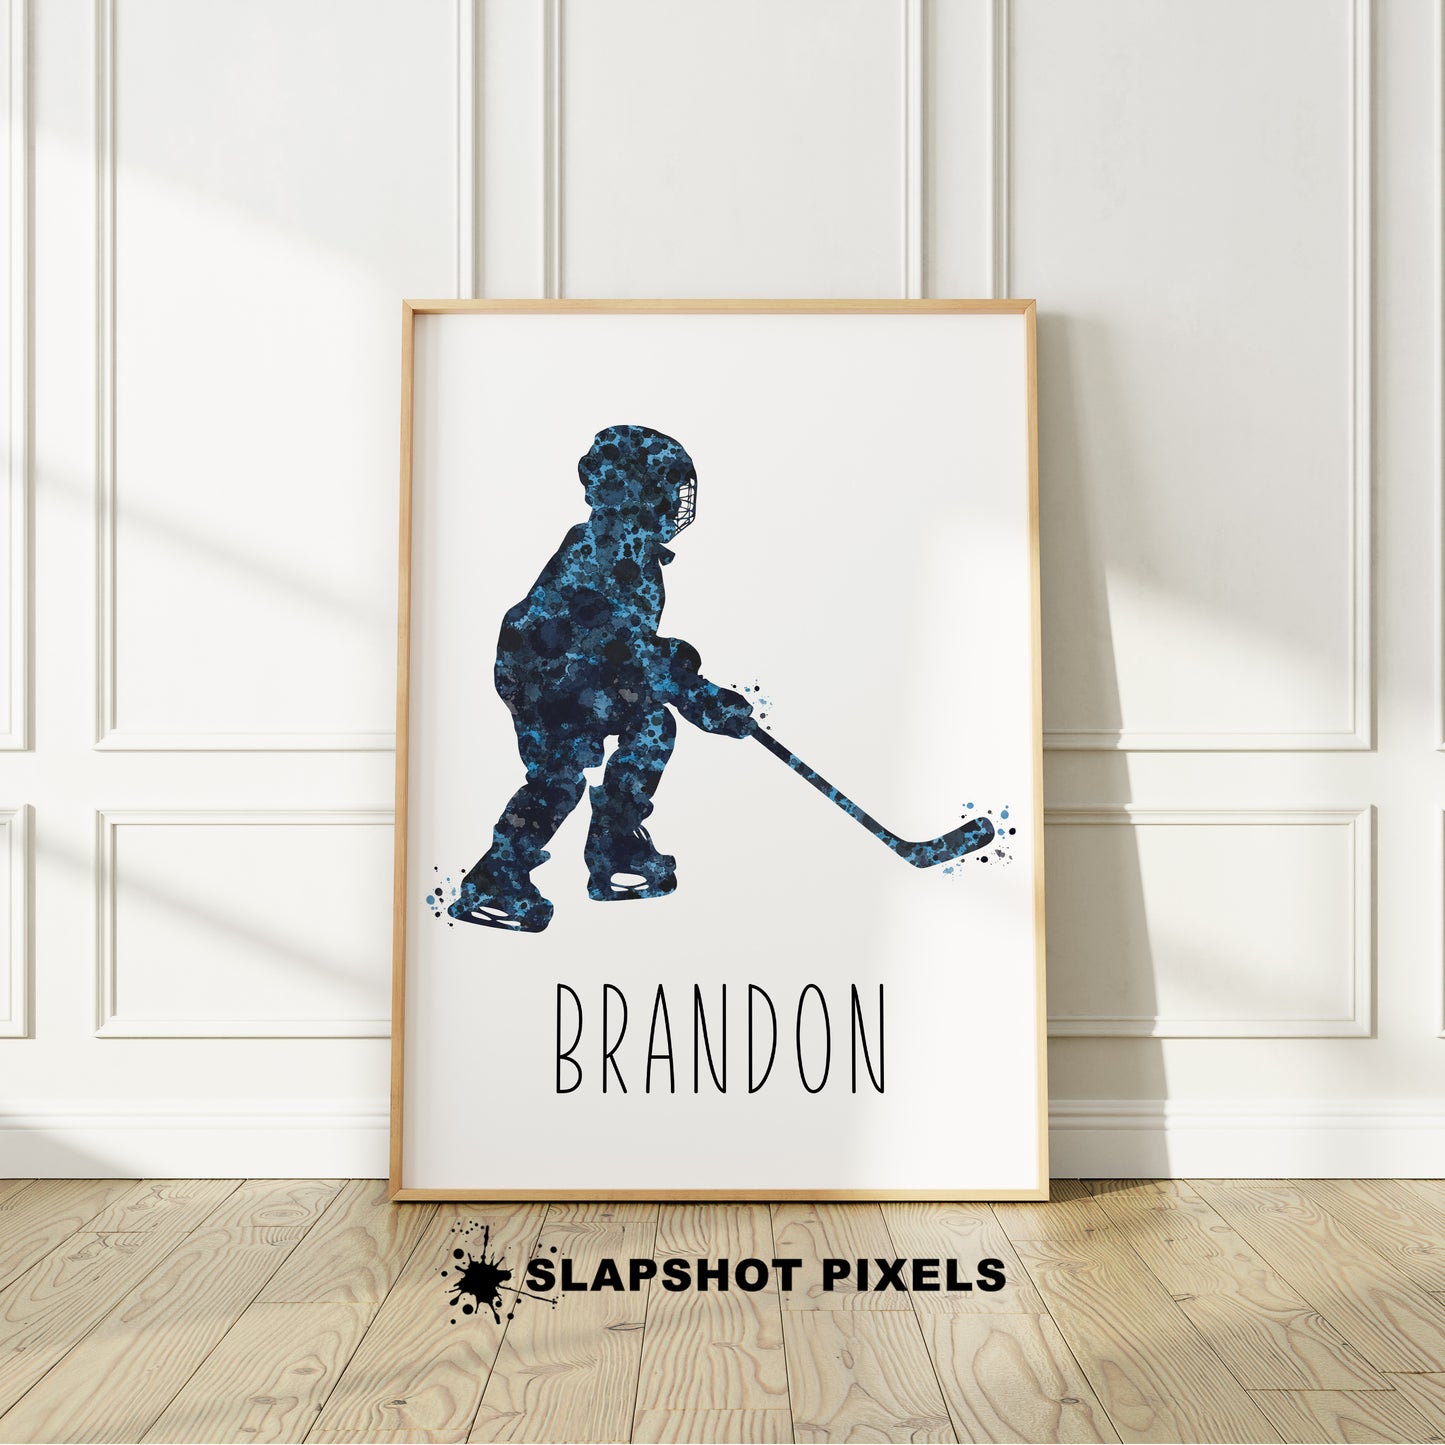 Personalized hockey poster of a child hockey player holding a hockey stick with custom name under the player. Designed in blue and black watercolor splatters. Perfect hockey gifts for boys, hockey team gifts, hockey coach gift, hockey wall art décor in a hockey bedroom and birthday gifts for hockey players.